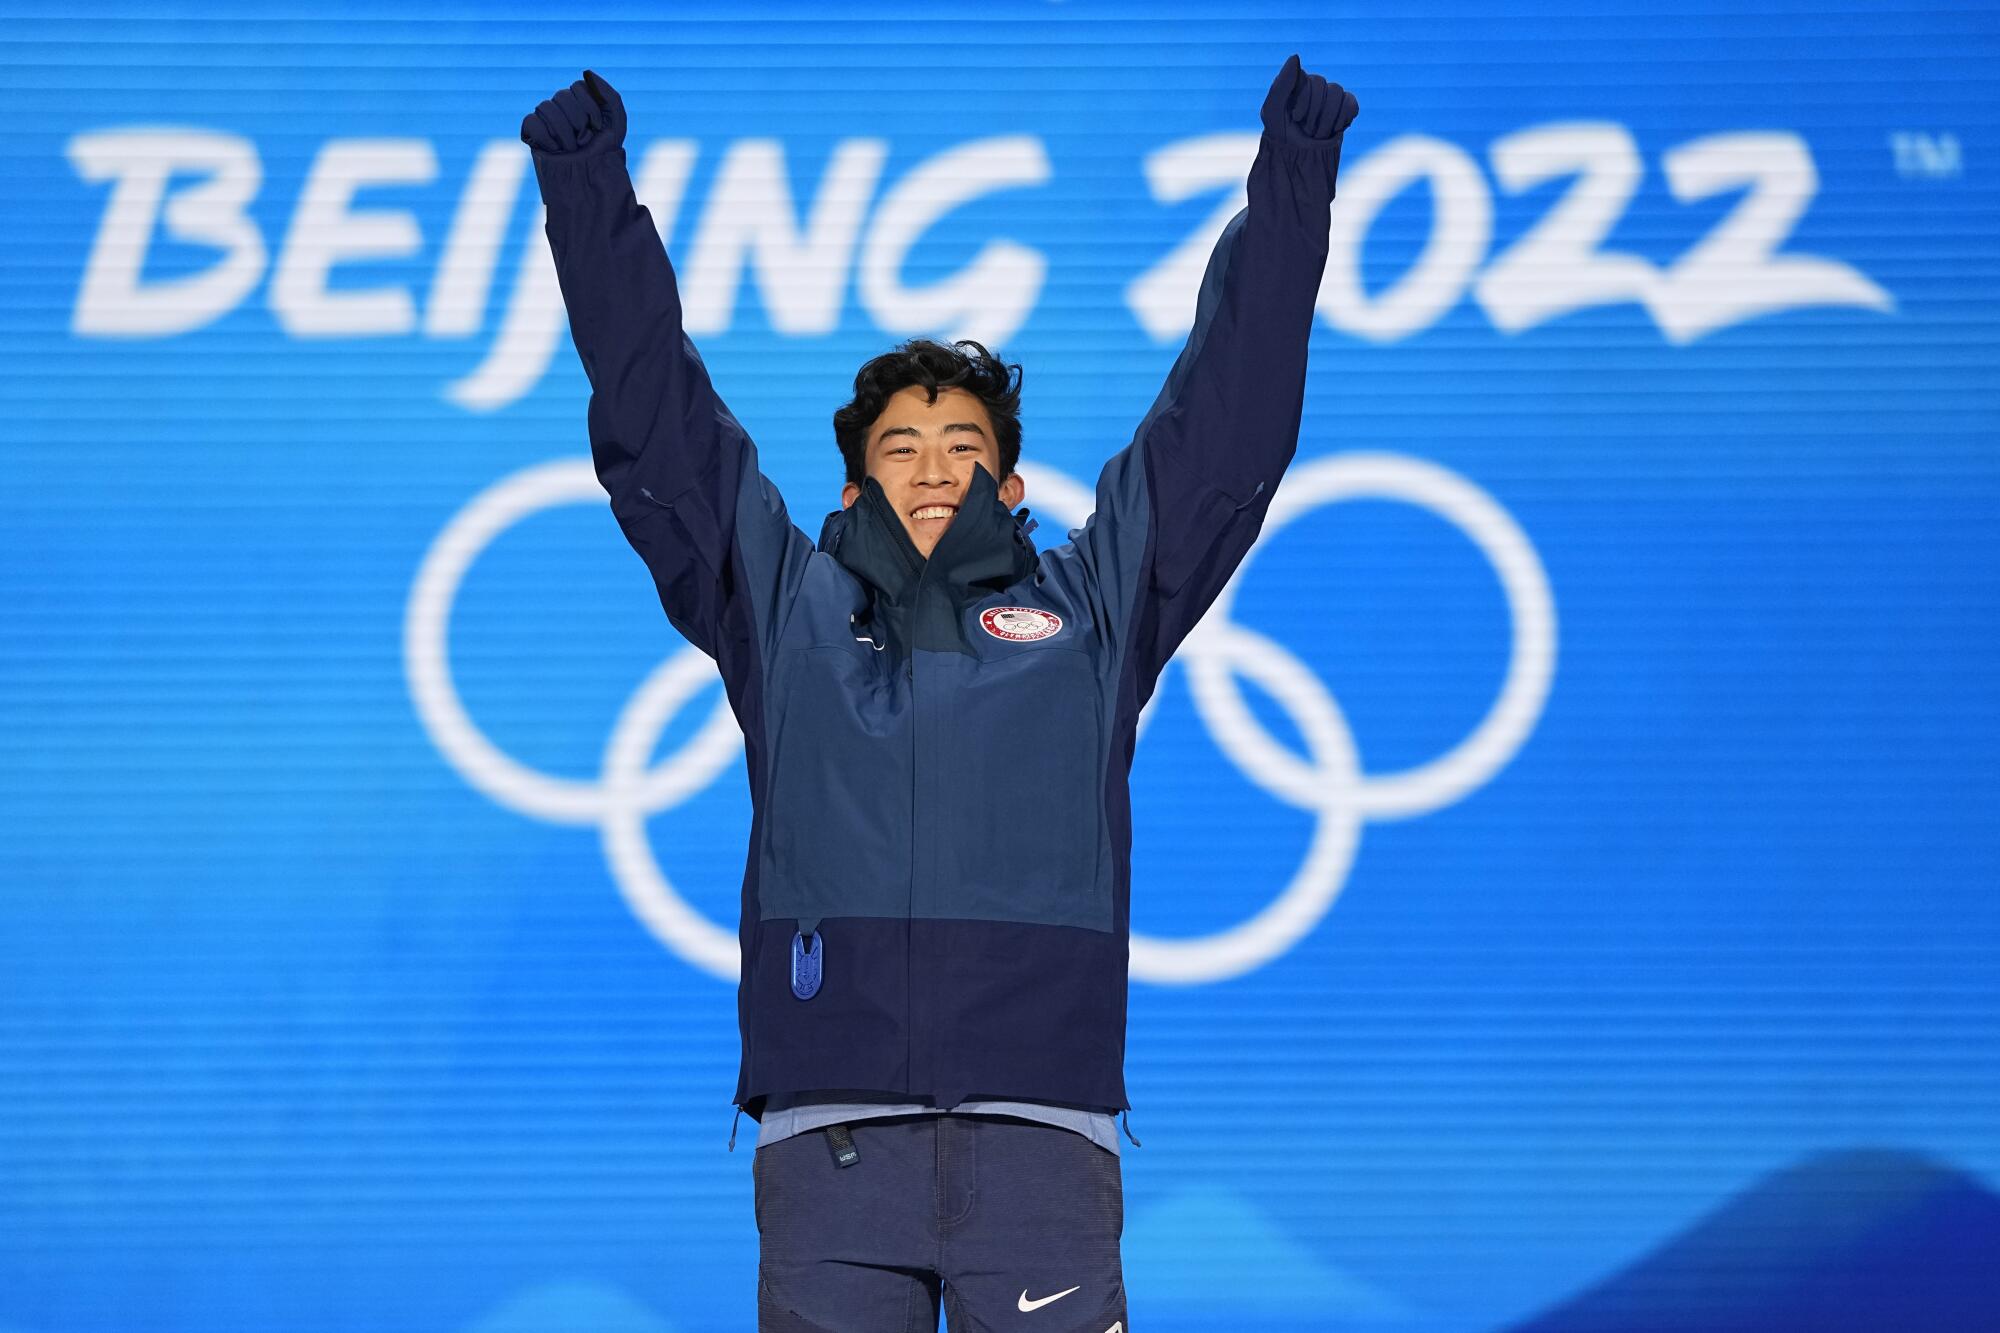 Gold medalist Nathan Chen of the United States celebrates after winning Olympic gold